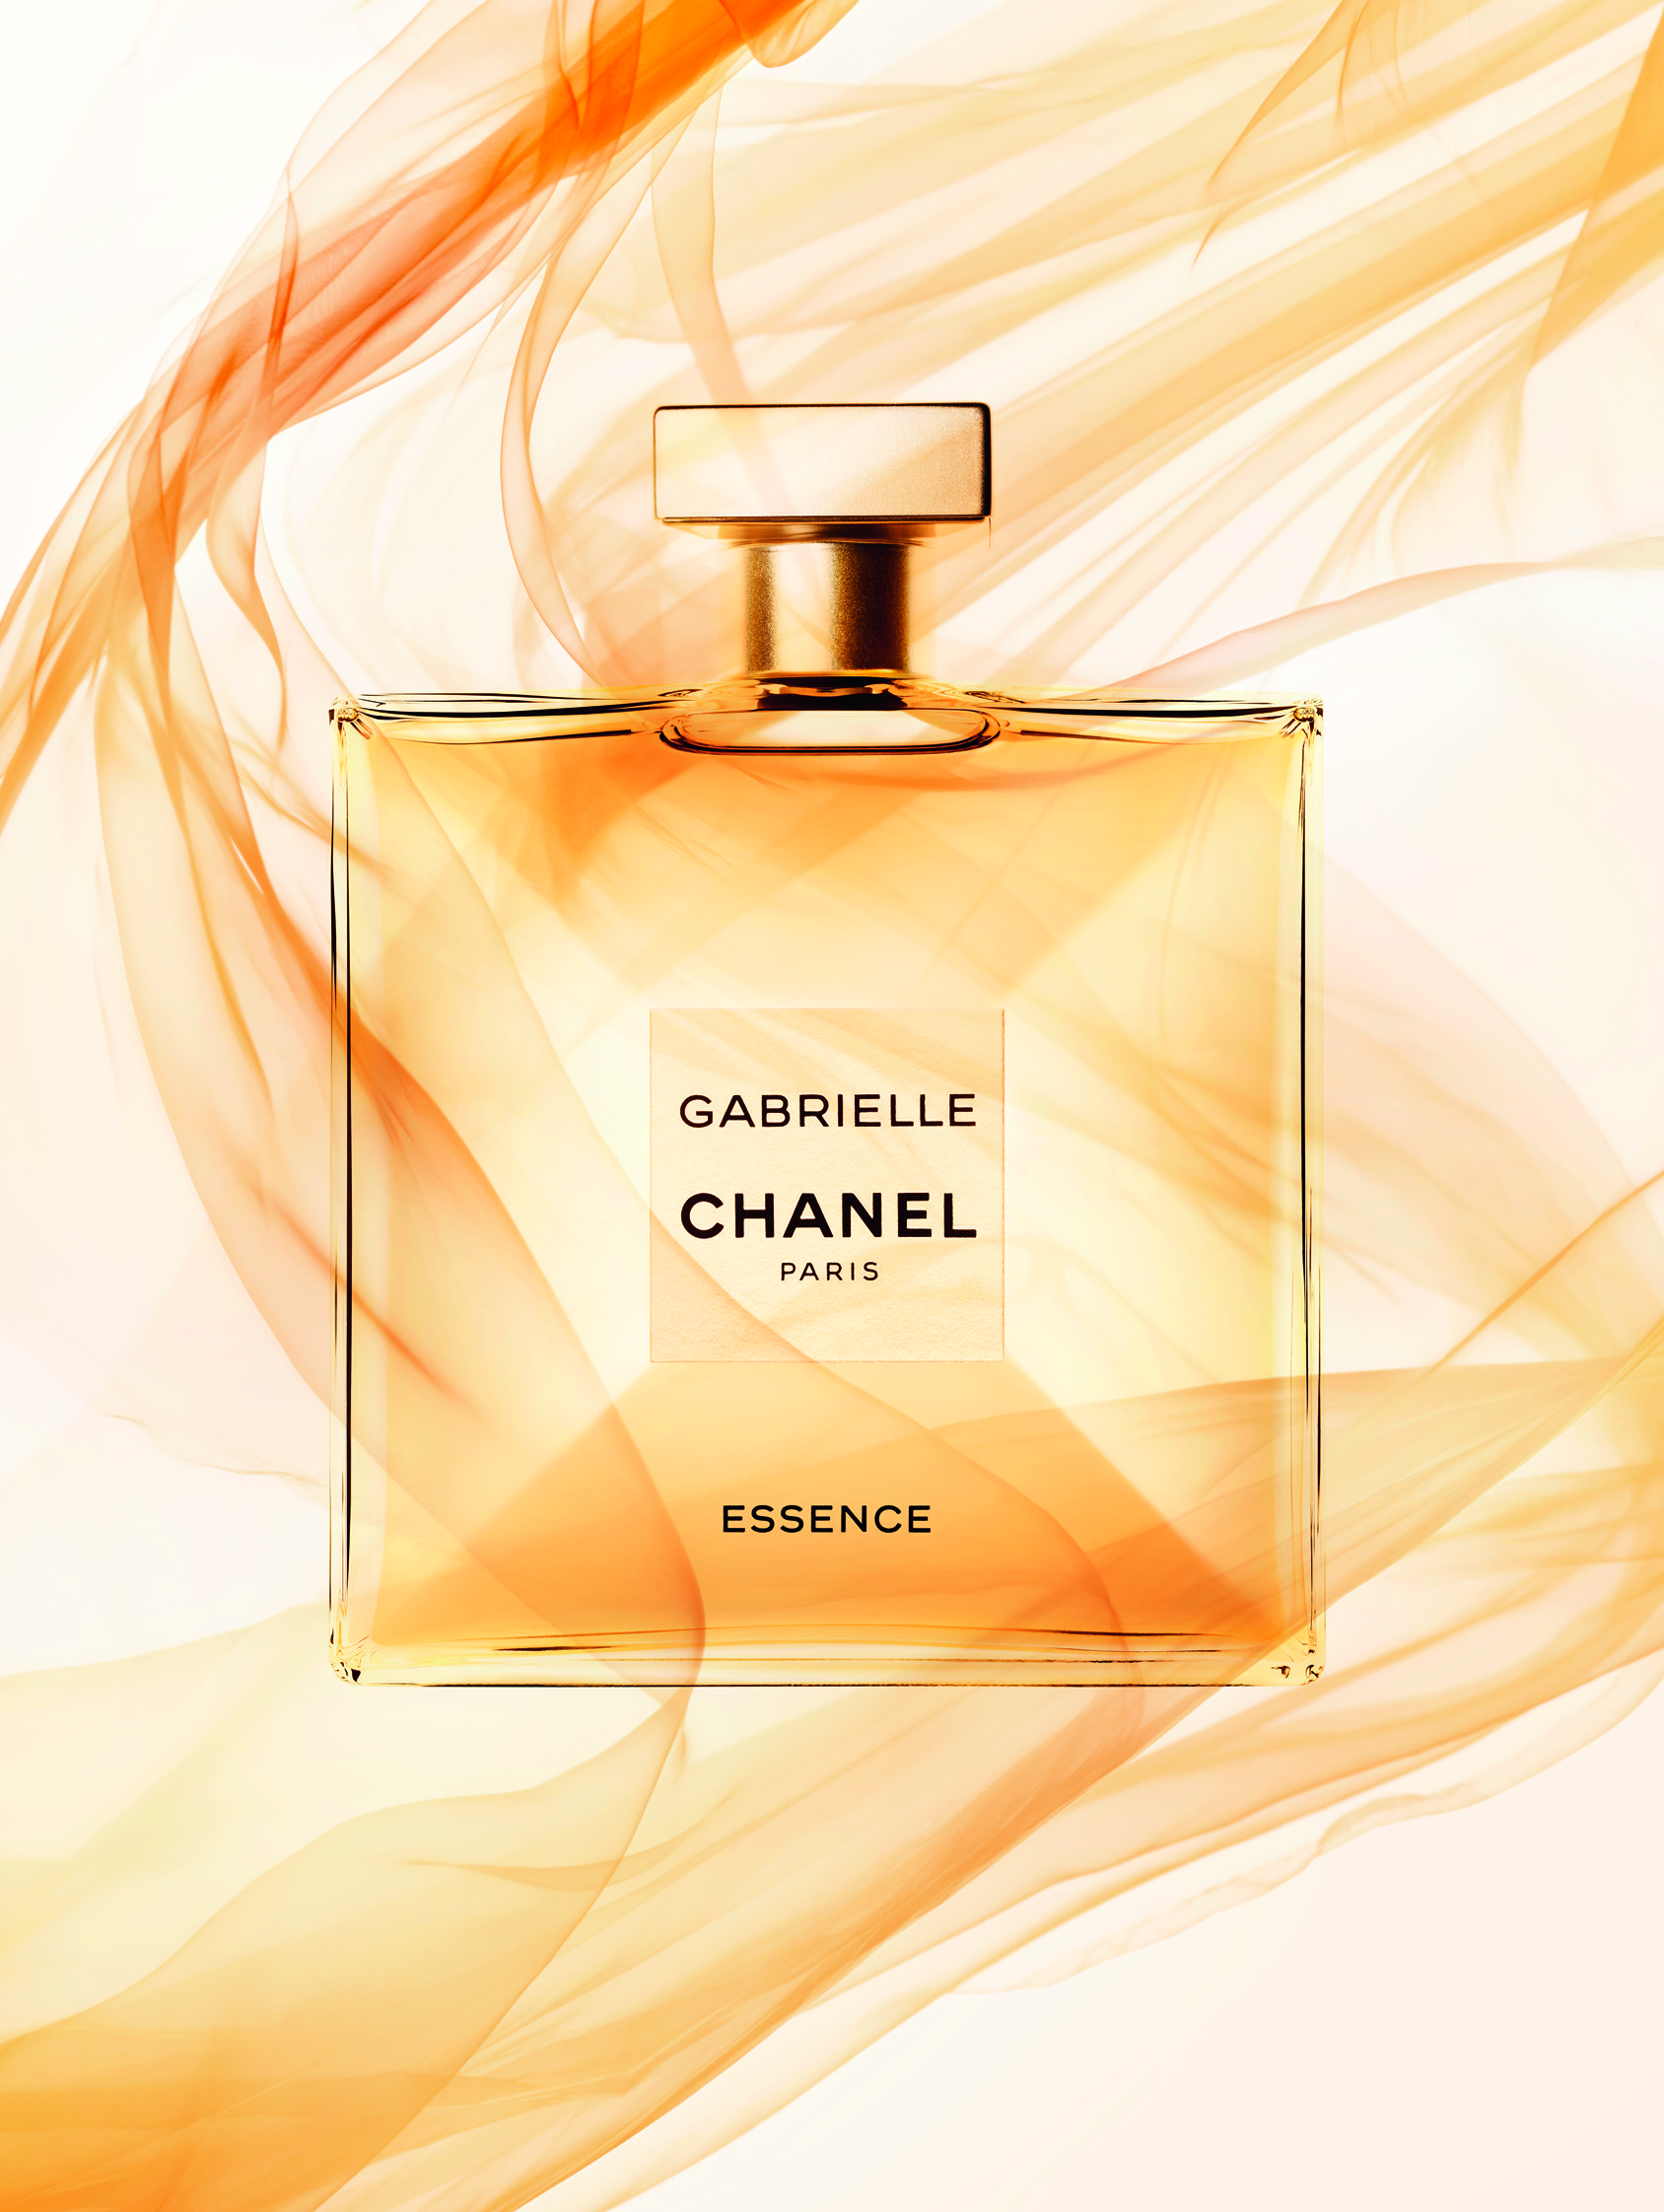 Buy Gabrielle Chanel Notes